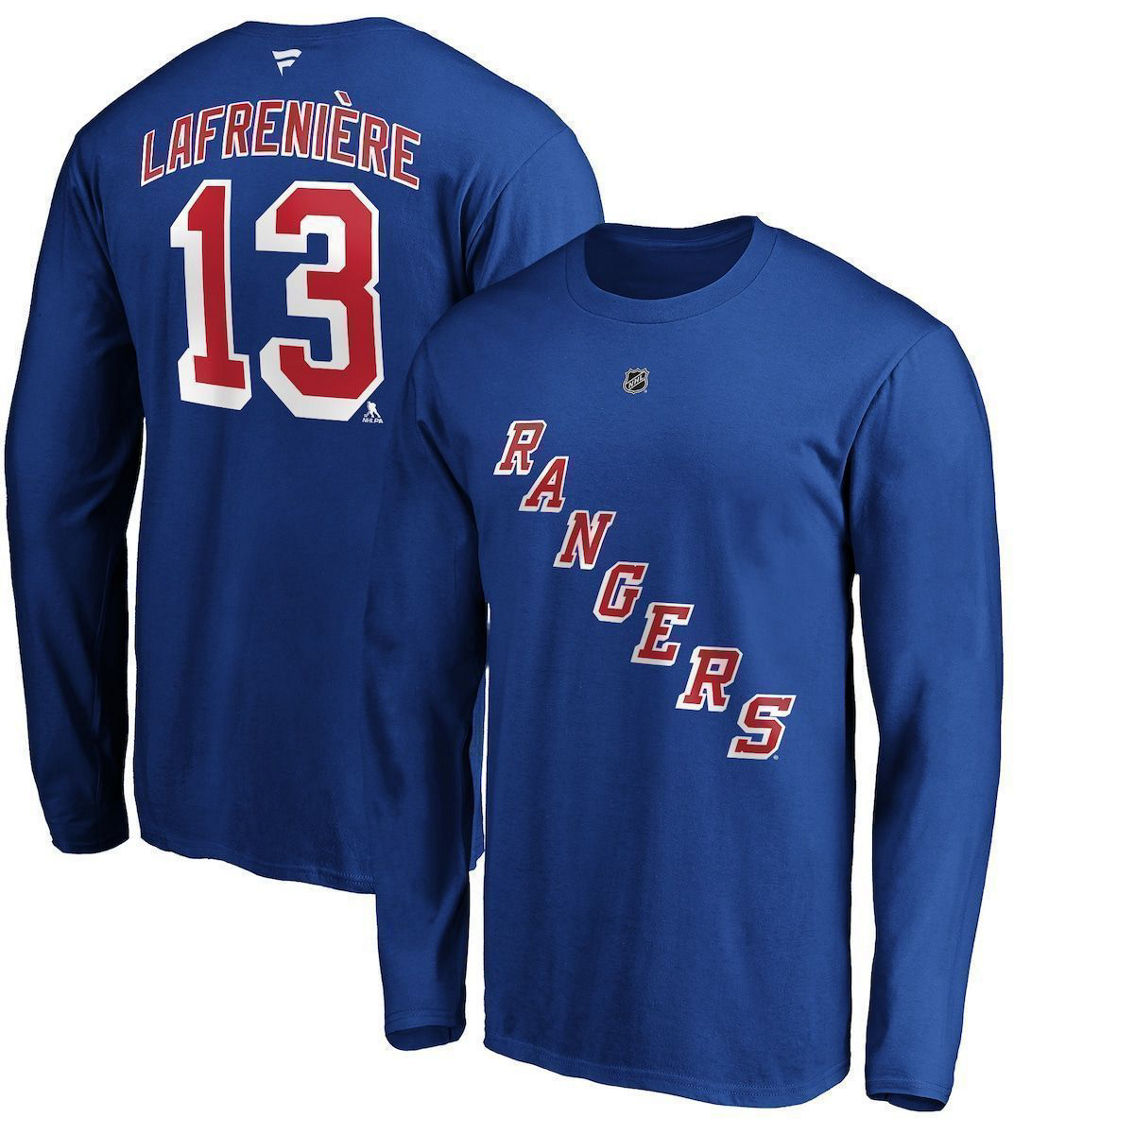 Fanatics Branded Men's Alexis Lafrenière Blue New York Rangers Authentic Stack Name & Number Long Sleeve T-Shirt - Image 2 of 4